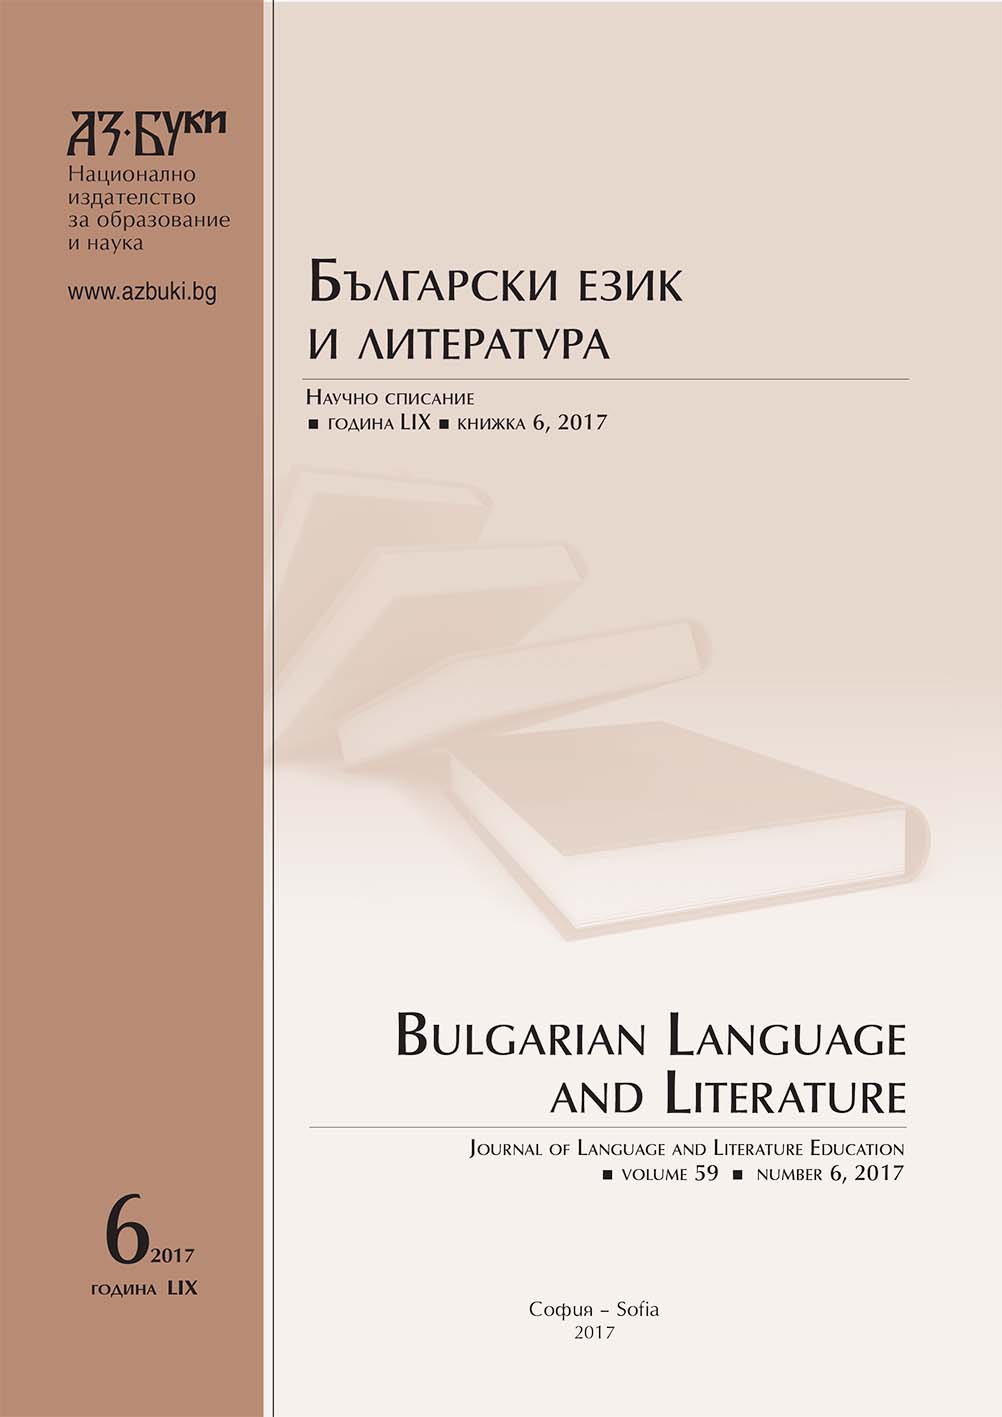 Bulgarian Language Sunday Schools in the UK from the viewpoint of country of origin and the host country